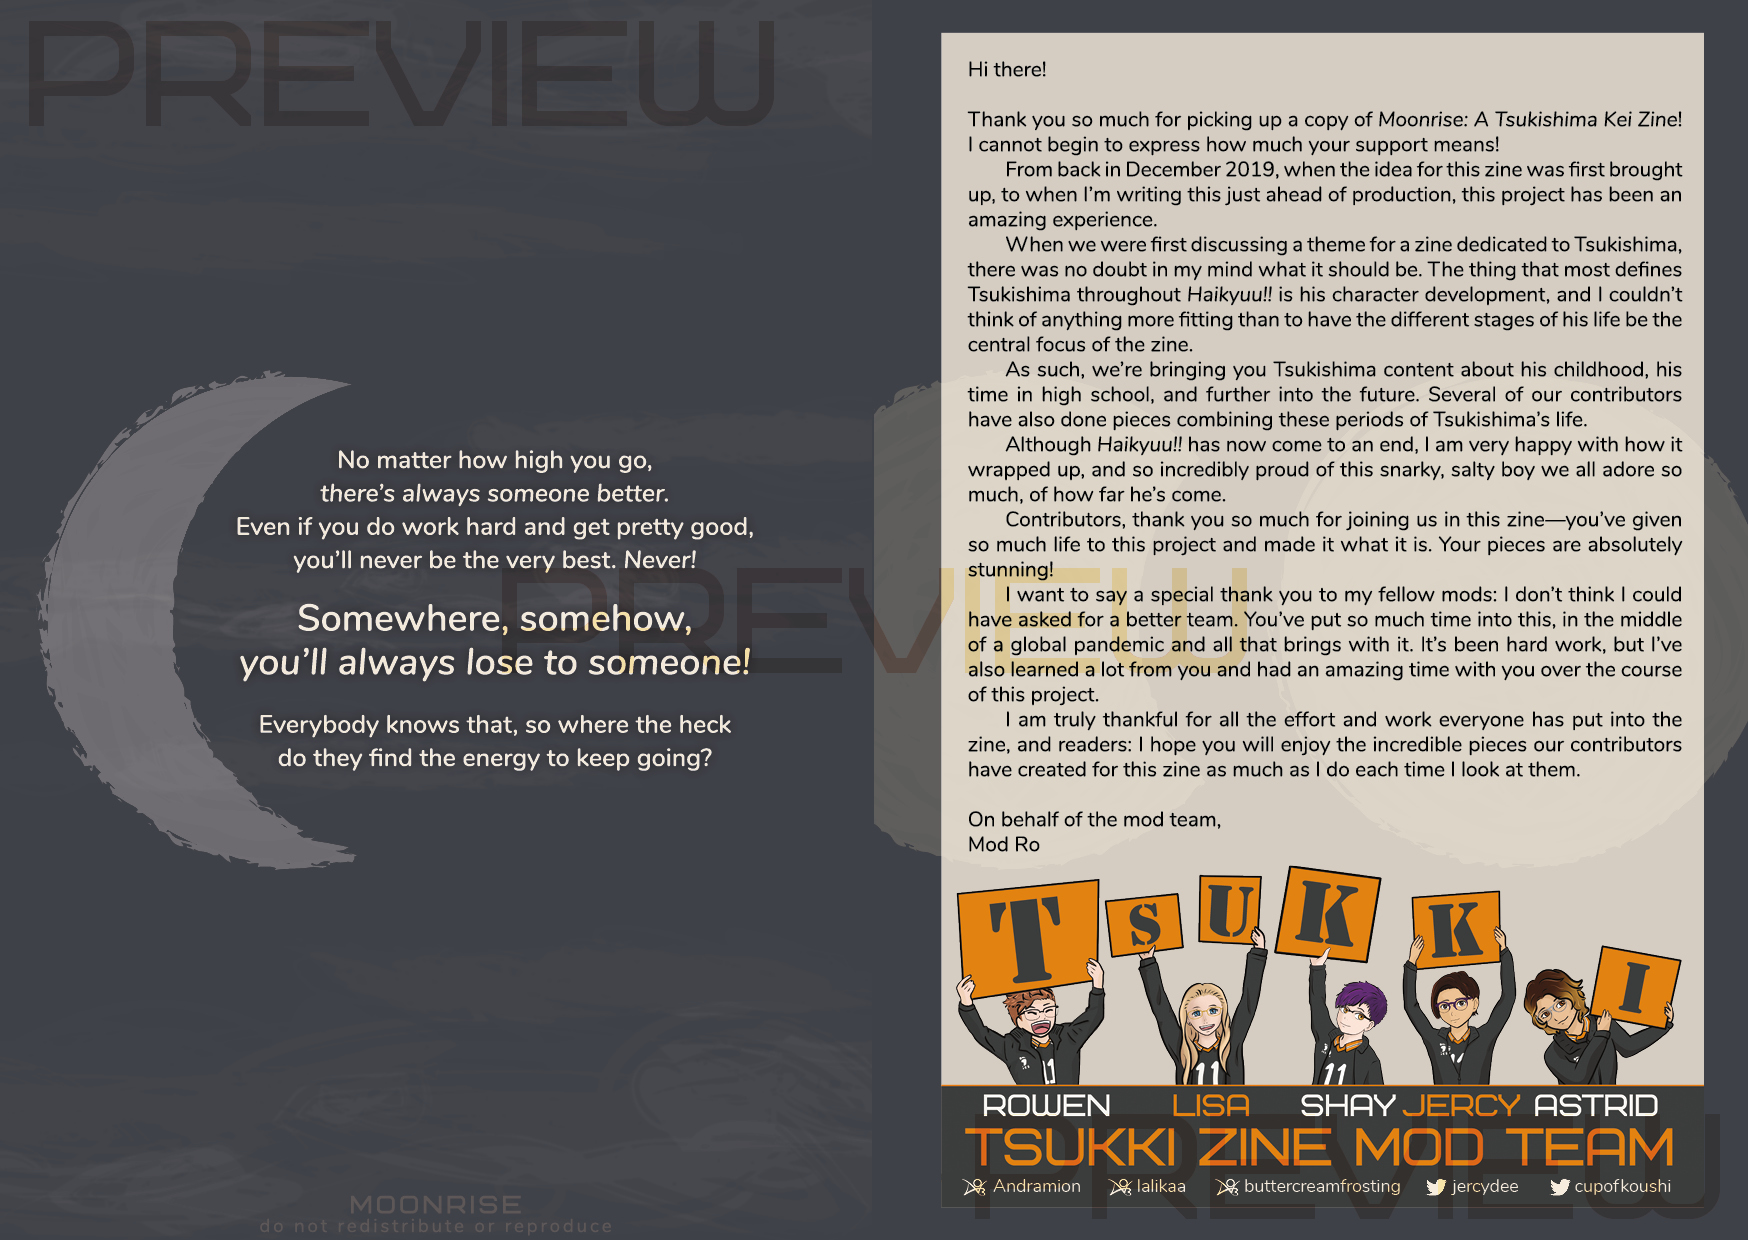 A screenshot of the opening spread from the digital copy of the zine.